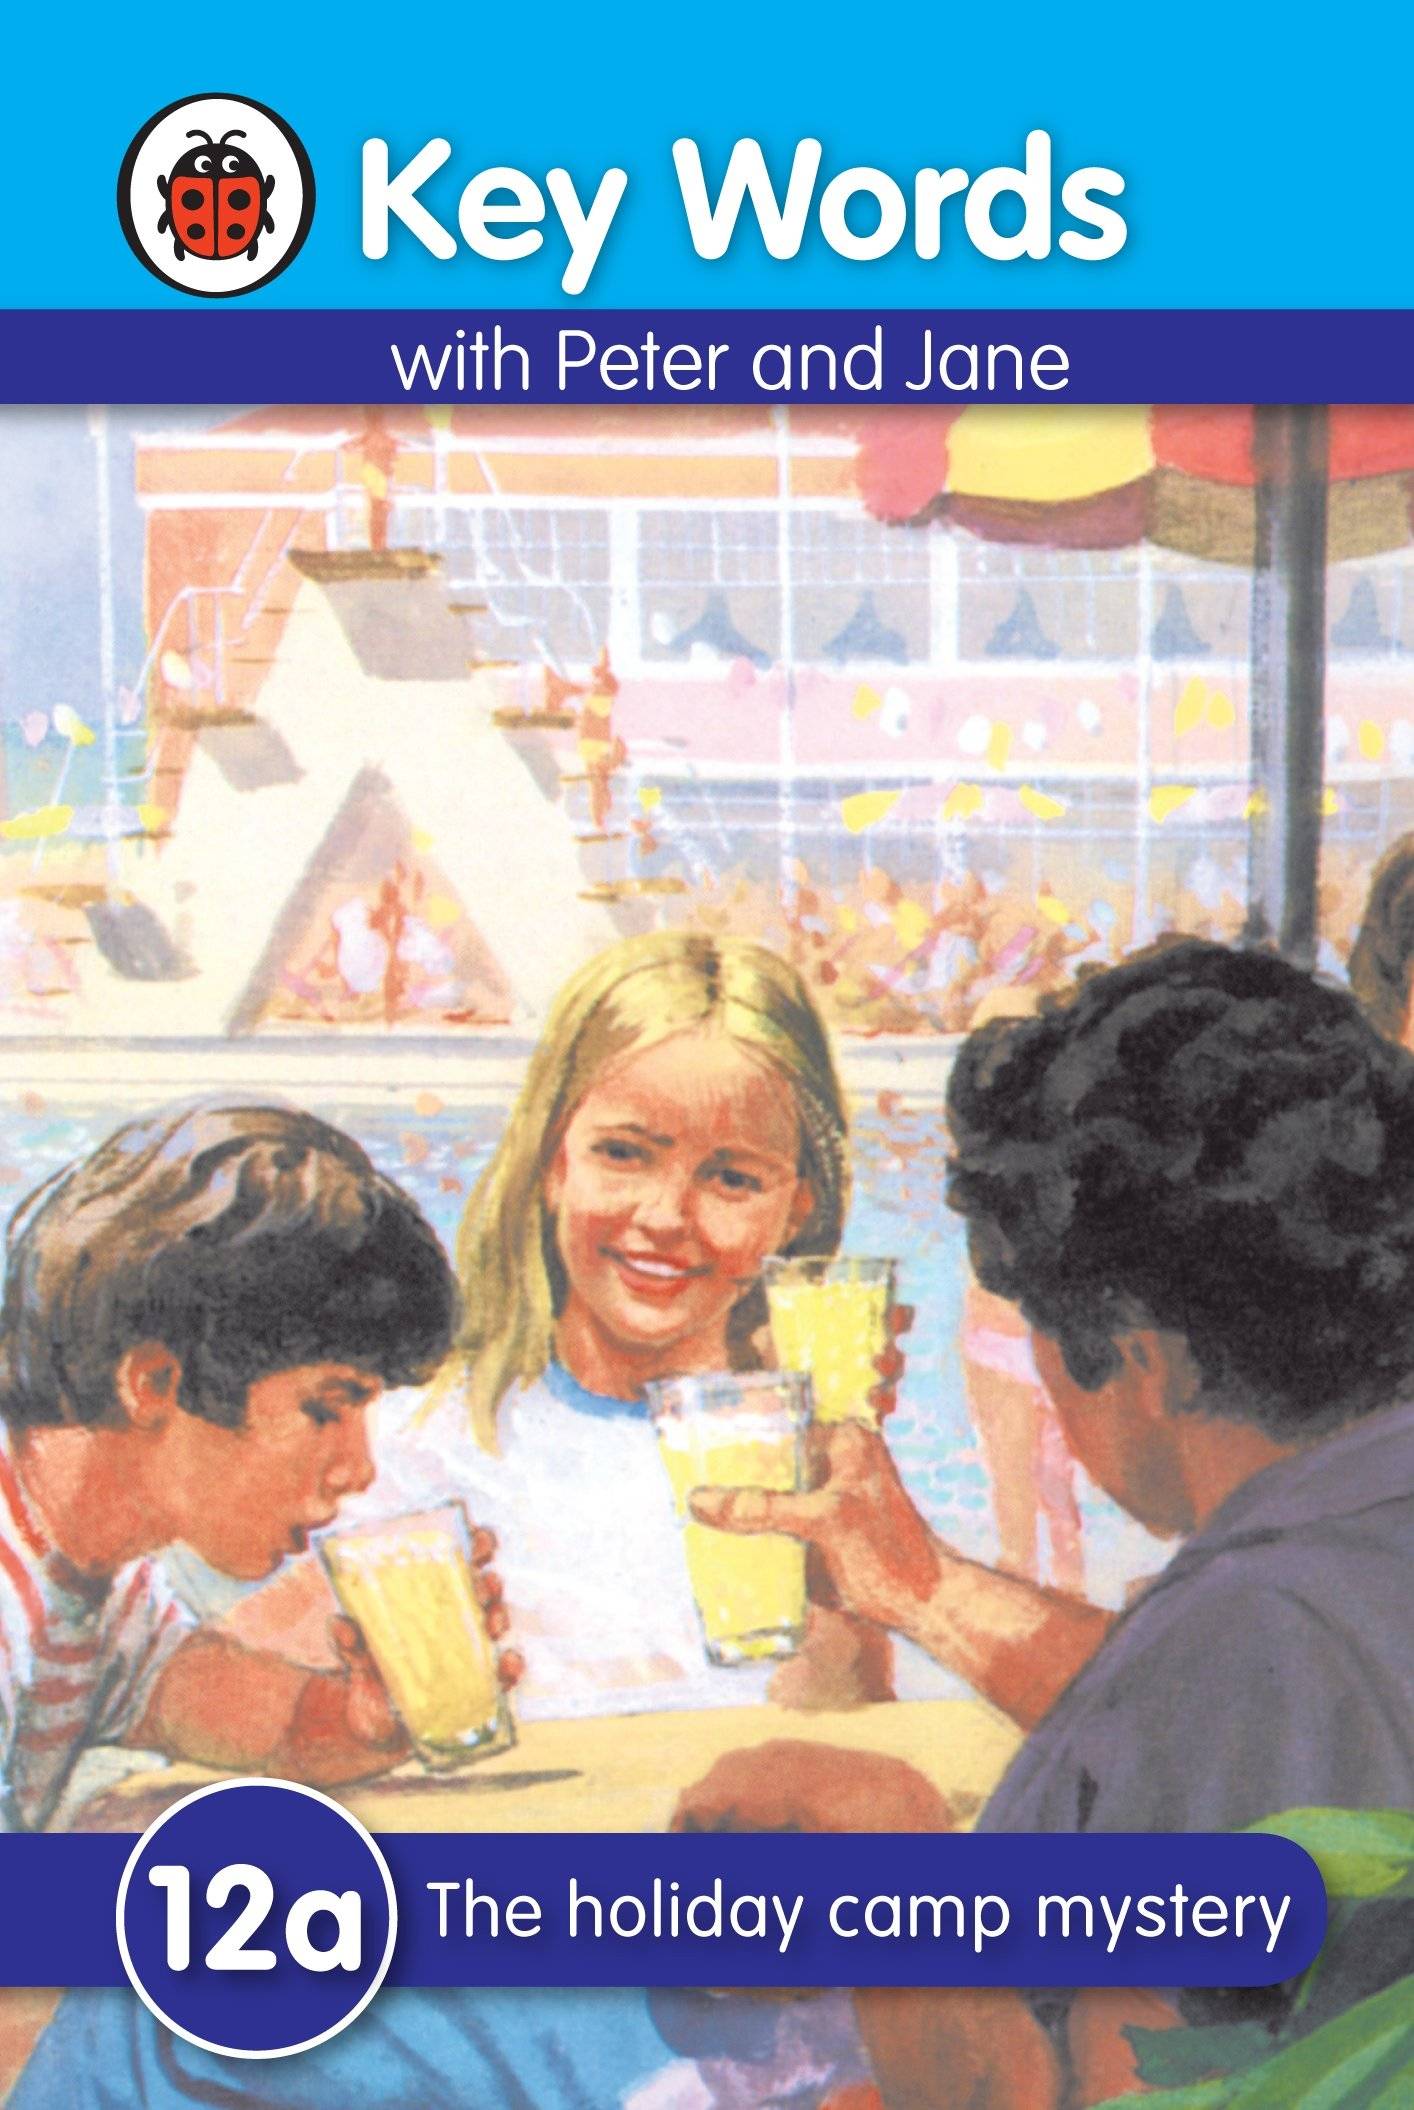 IMG : Key words with Peter and Jane- The holiday camp mystery#12a